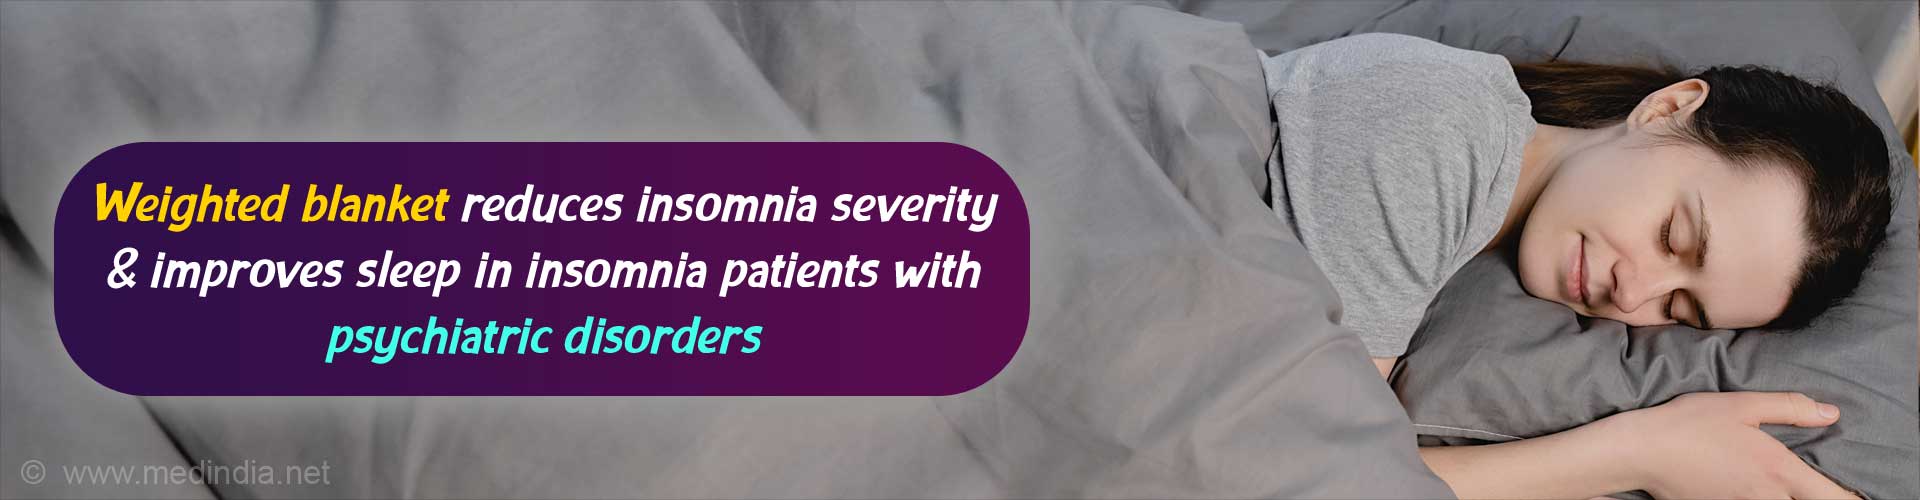 Weighted Blankets Can Decrease Insomnia Severity & Improve Sleep in